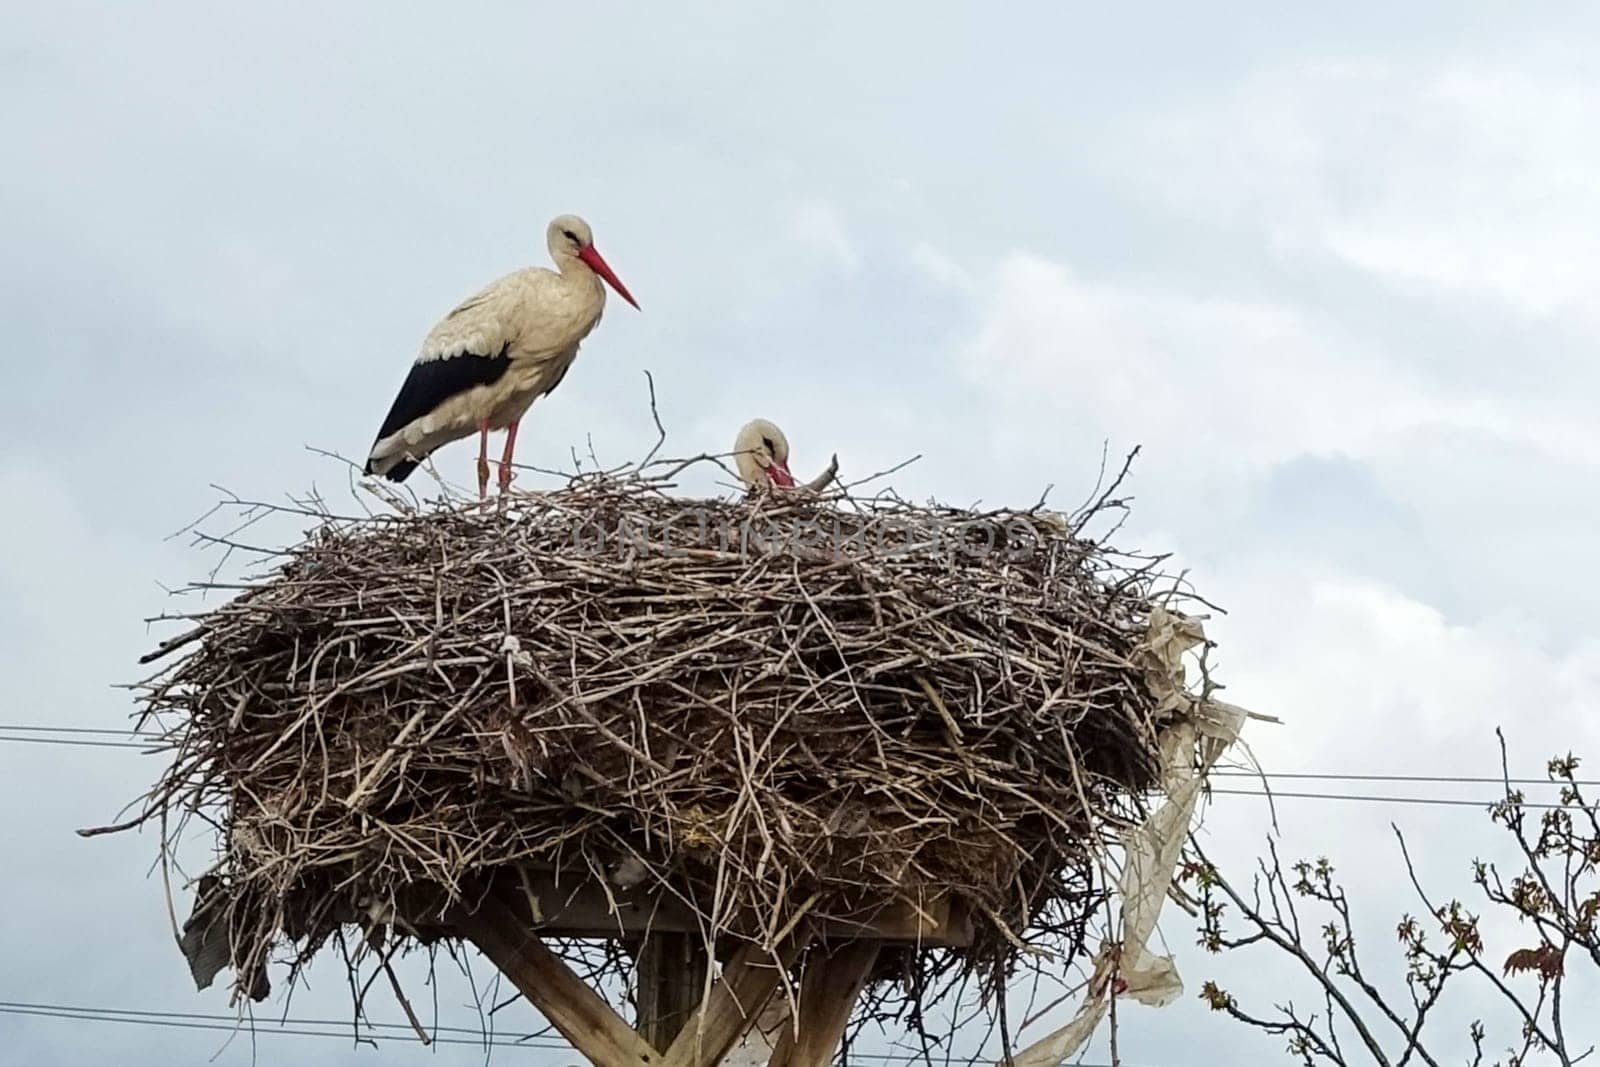 there is a stork's nest and a female stork and a male stork in the nest, in the spring the storks return to their nests,